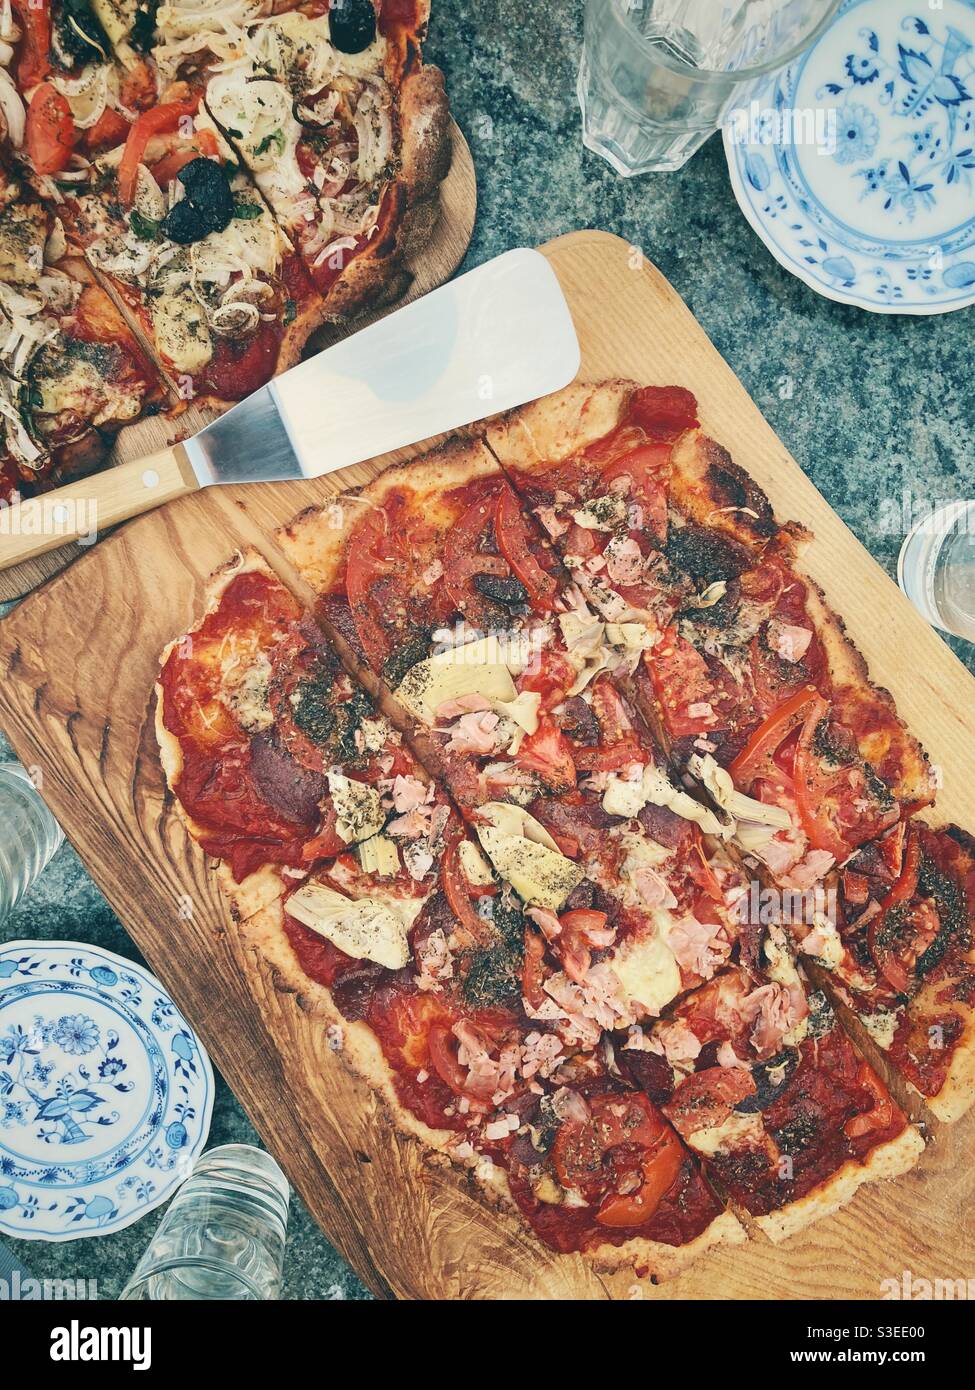 Homemade Pizza on a Wooden serving Board Stock Photo